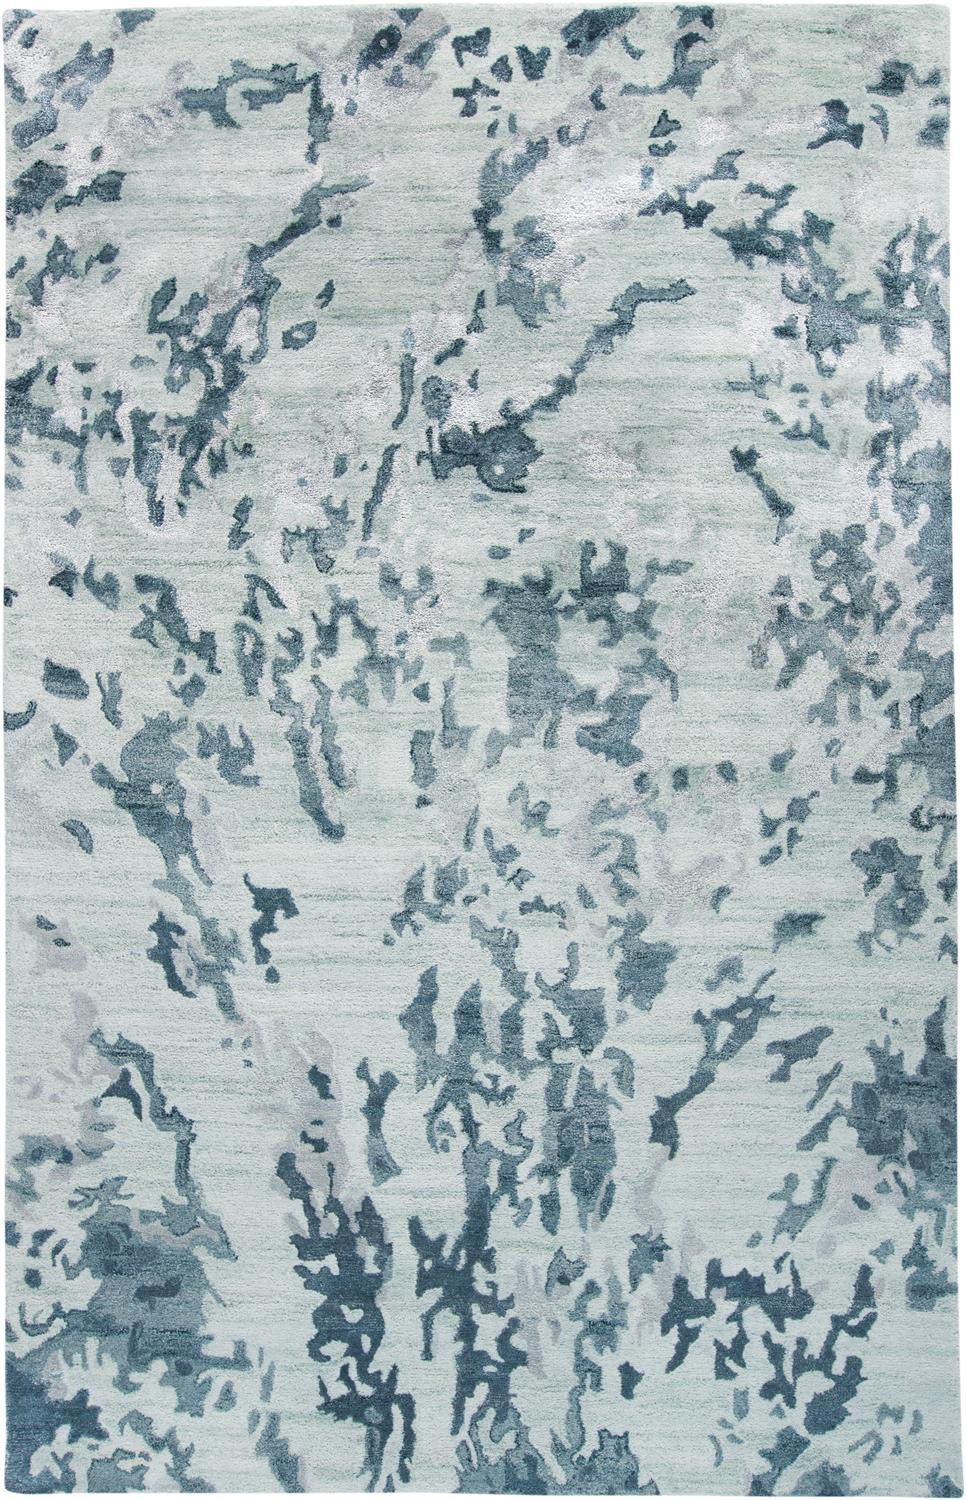 8' X 10' Blue Green And Silver Abstract Tufted Handmade Area Rug-512246-1